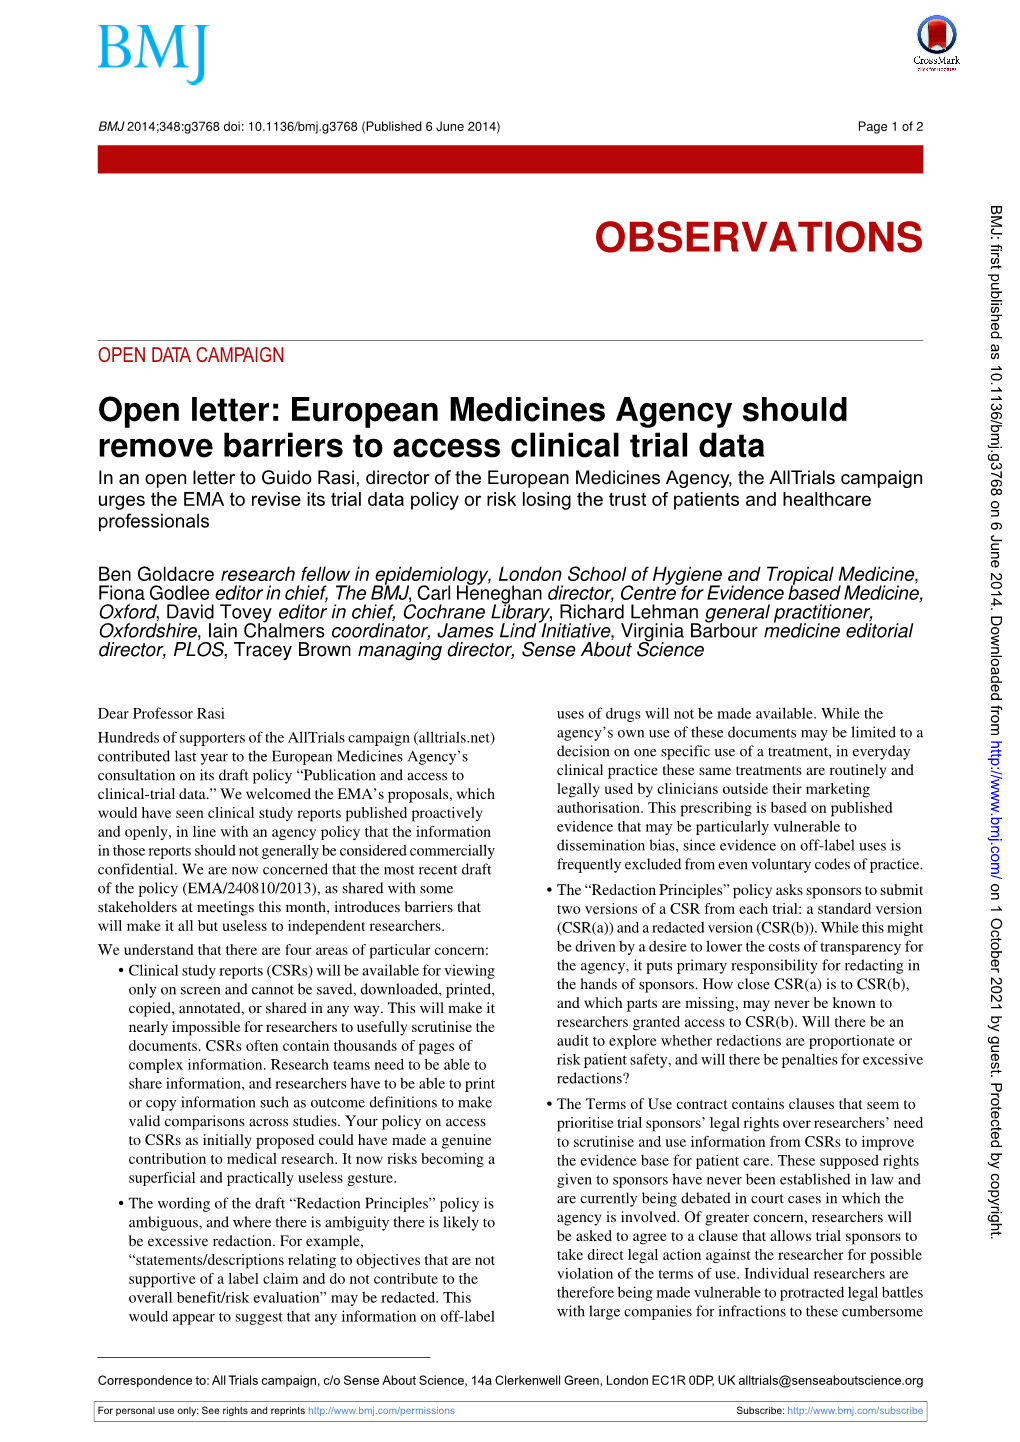 European Medicines Agency Should Remove Barriers To